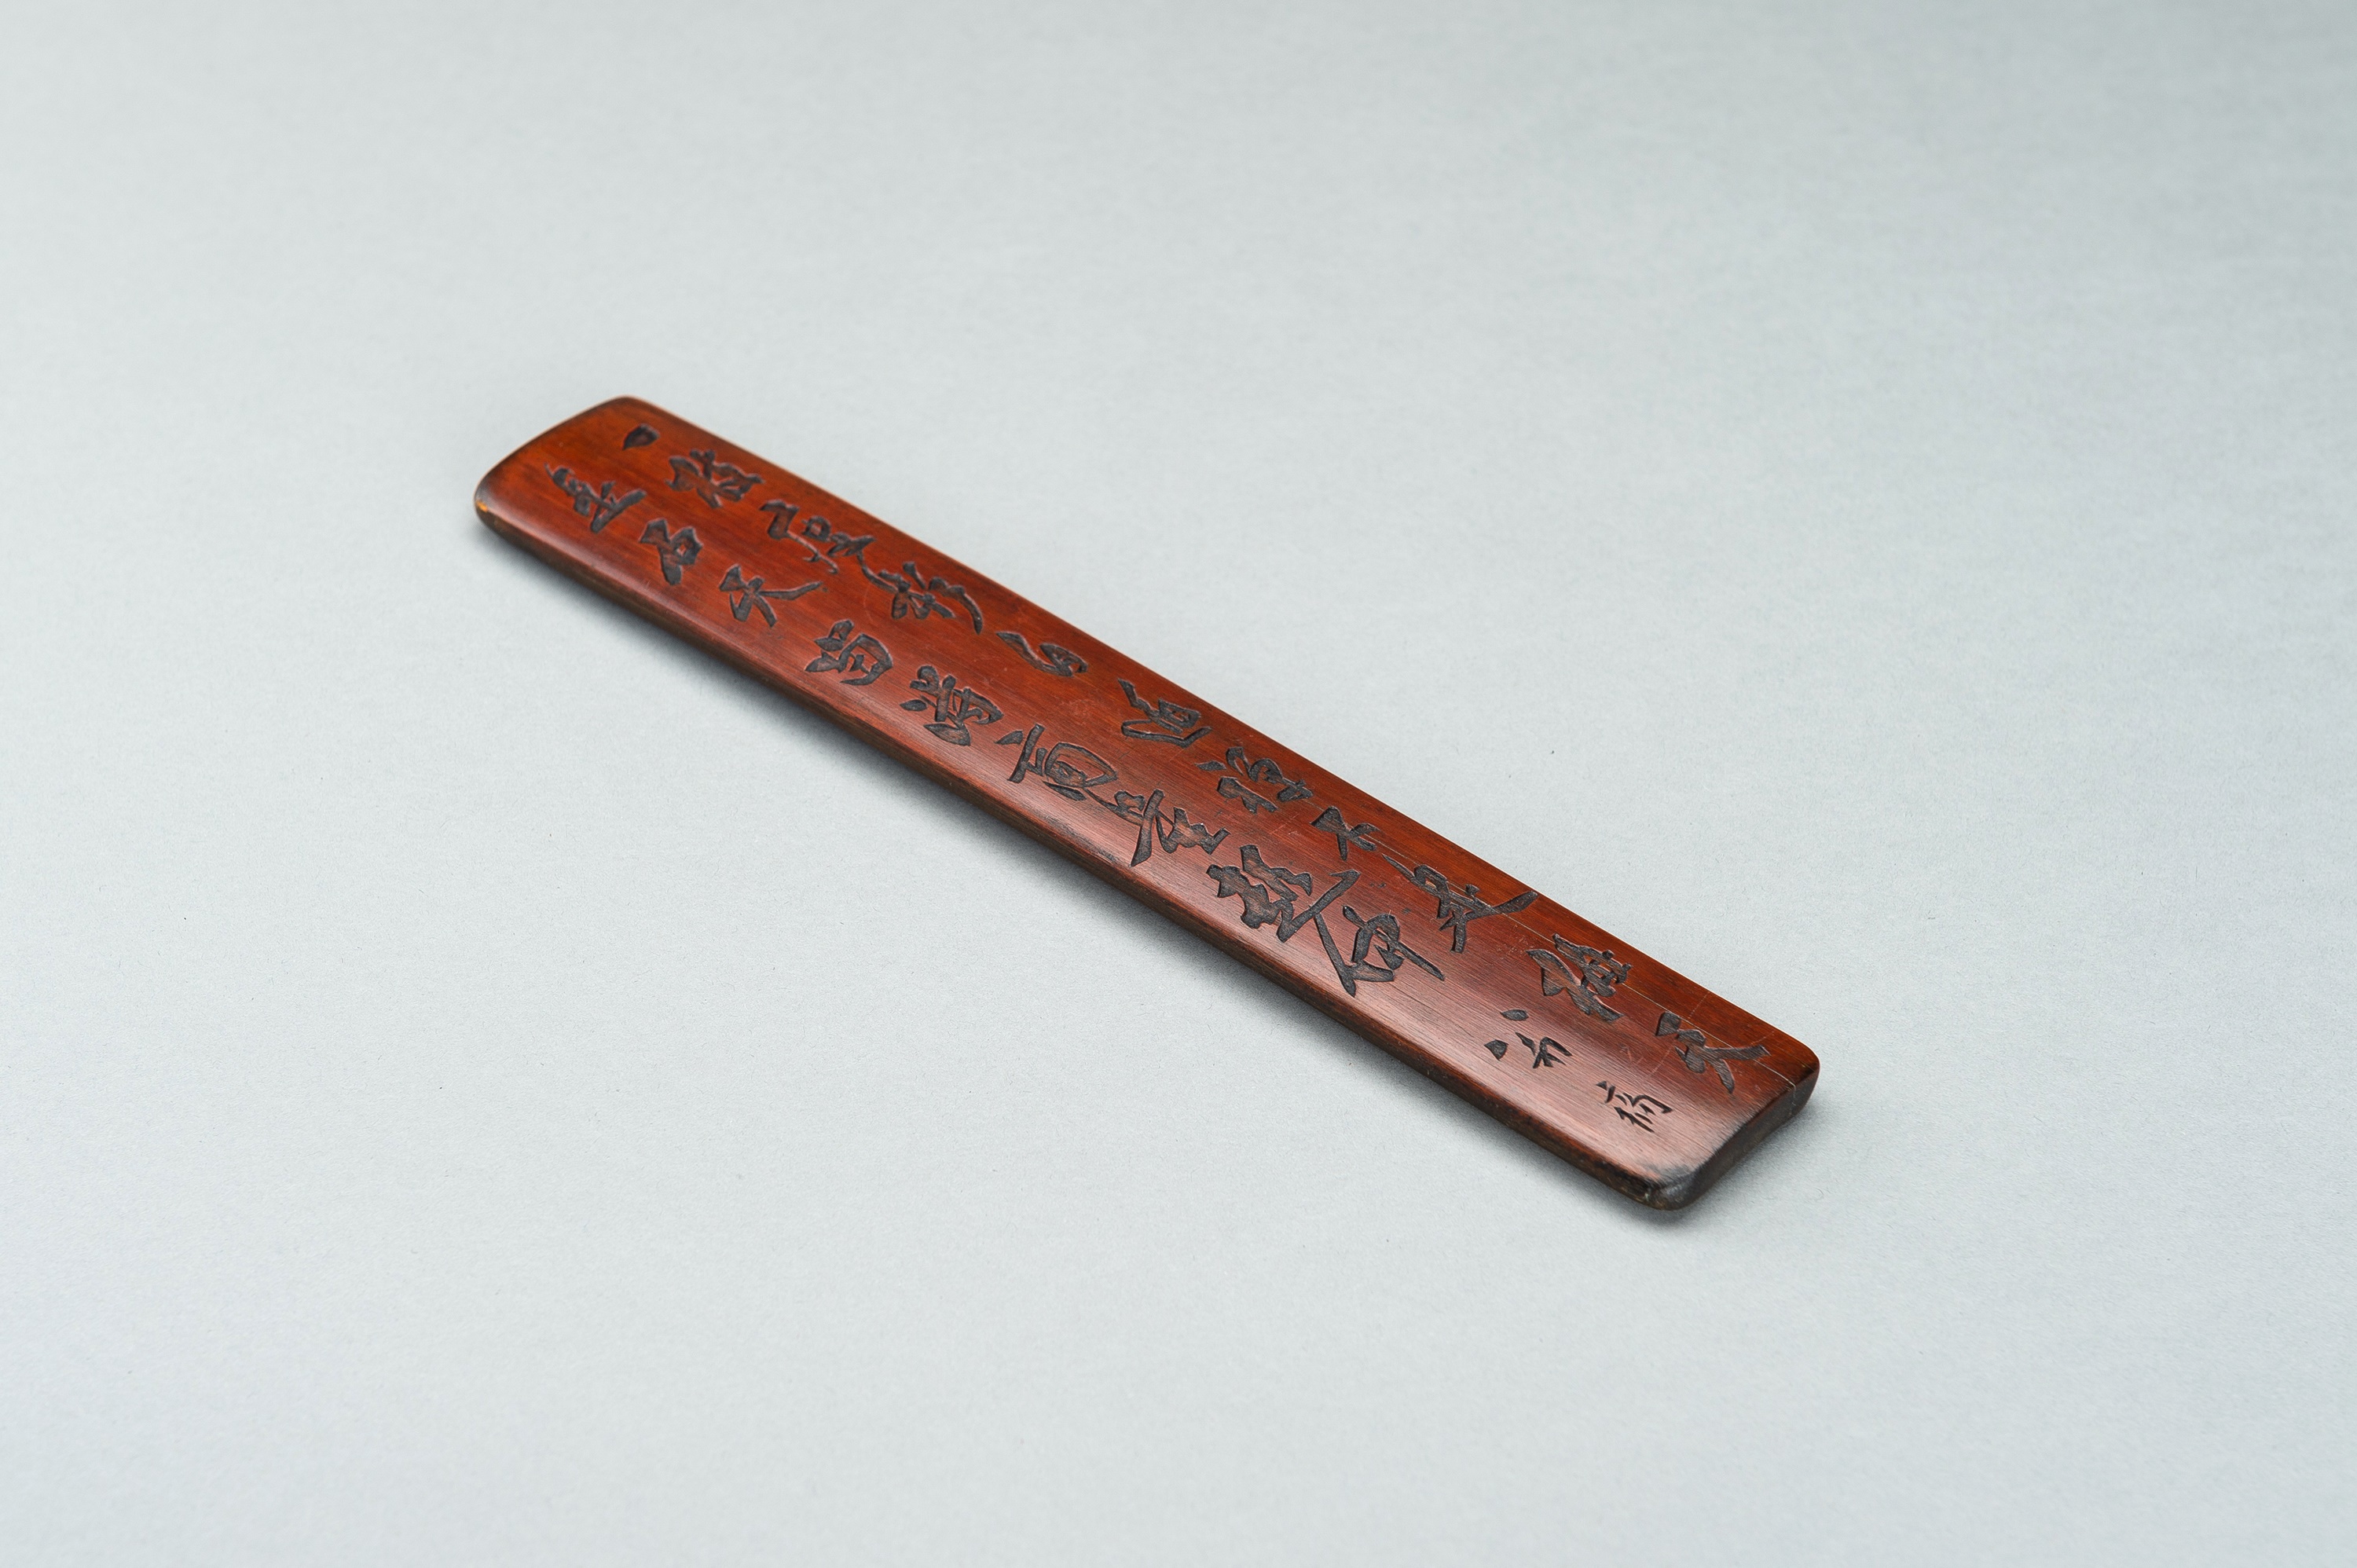 A BAMBOO WRIST REST WITH CALIGRAPHY - Image 7 of 9